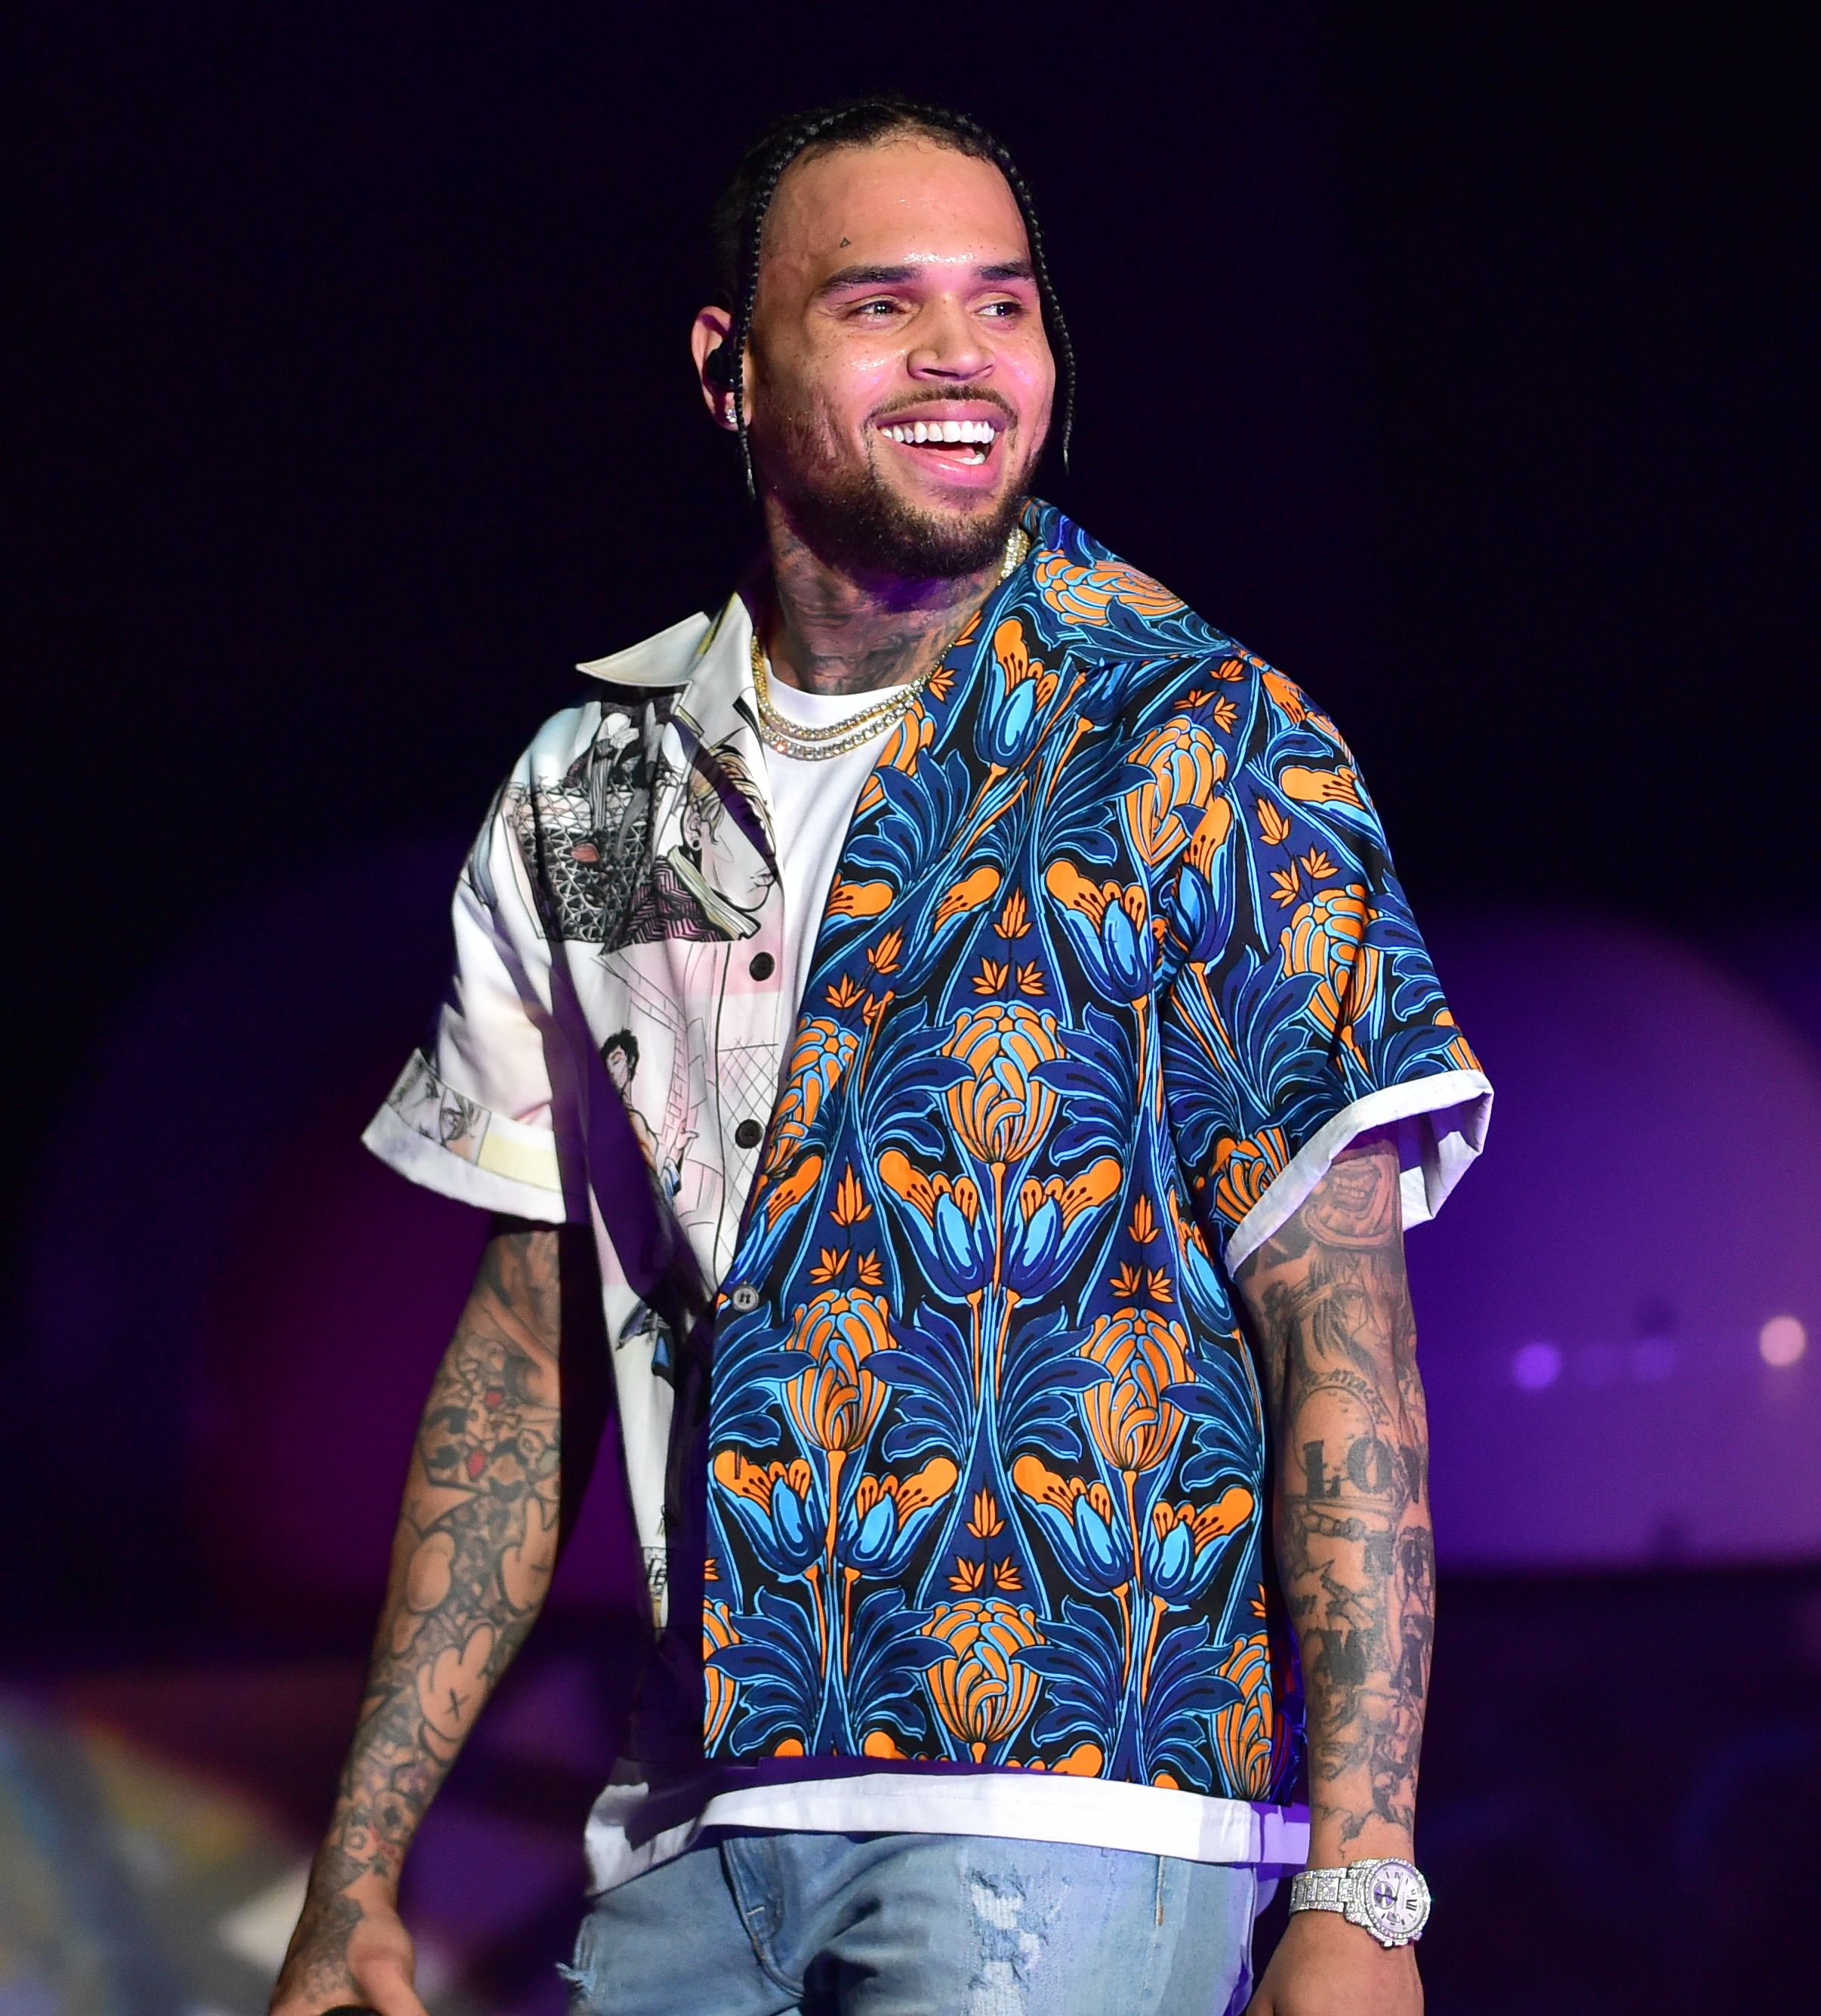 Chris Brown performs at the 2019 Tycoon Music Festival at Cellairis Ampitheatre at Lakewood on June 8, 2019. | Photo: Getty Images